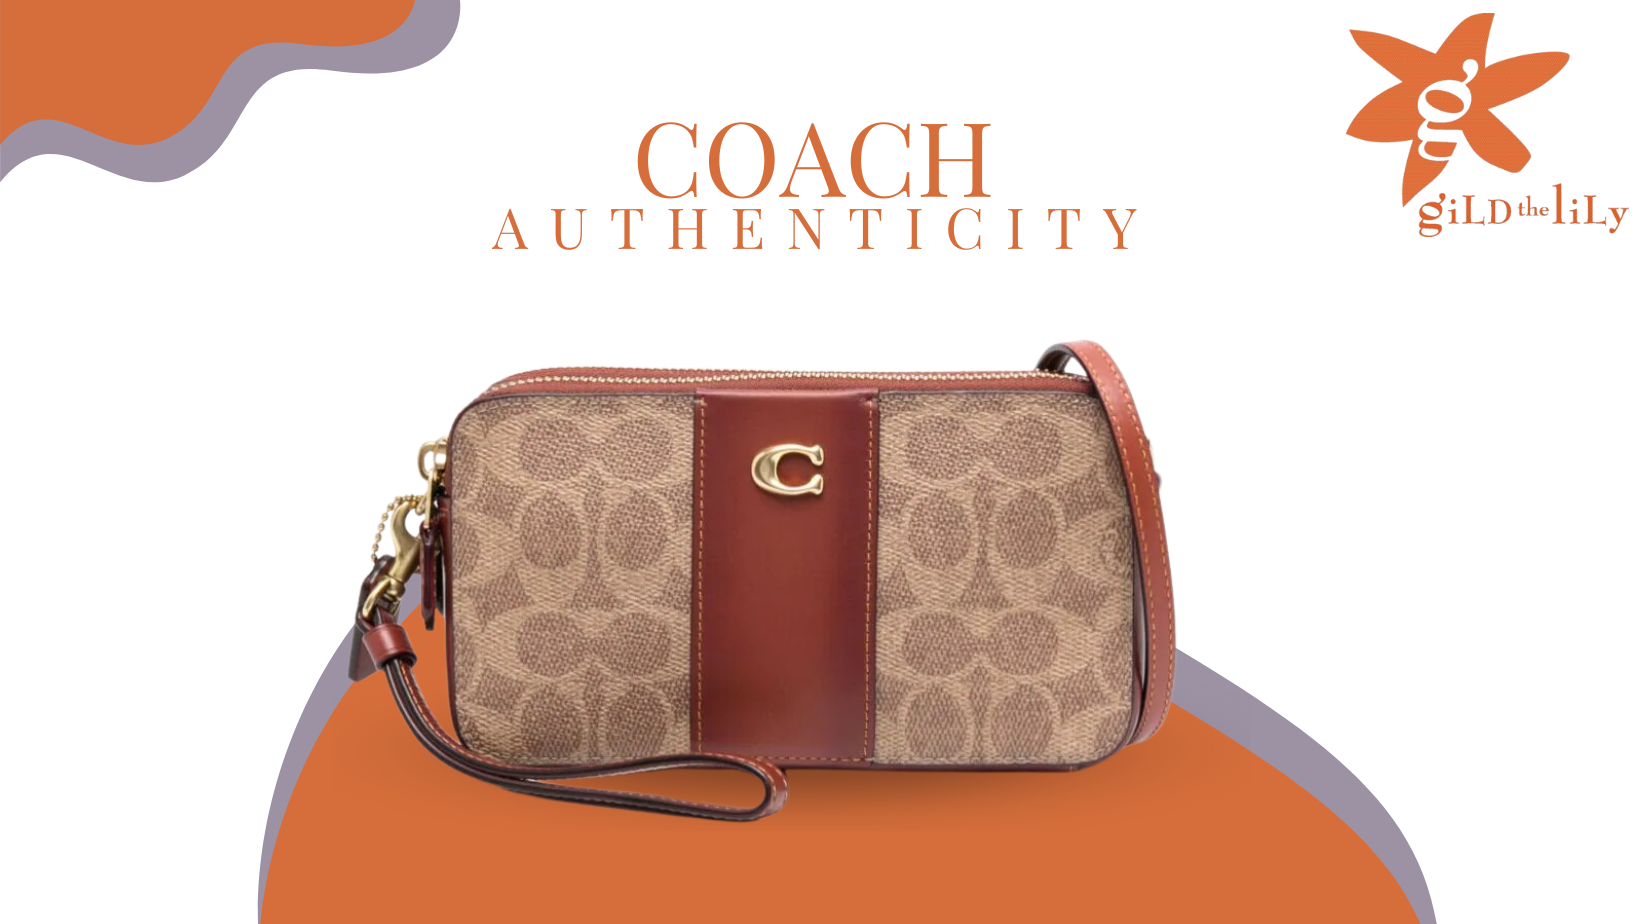 The Ultimate Guide to Coach Serial Numbers - Coach Style Number